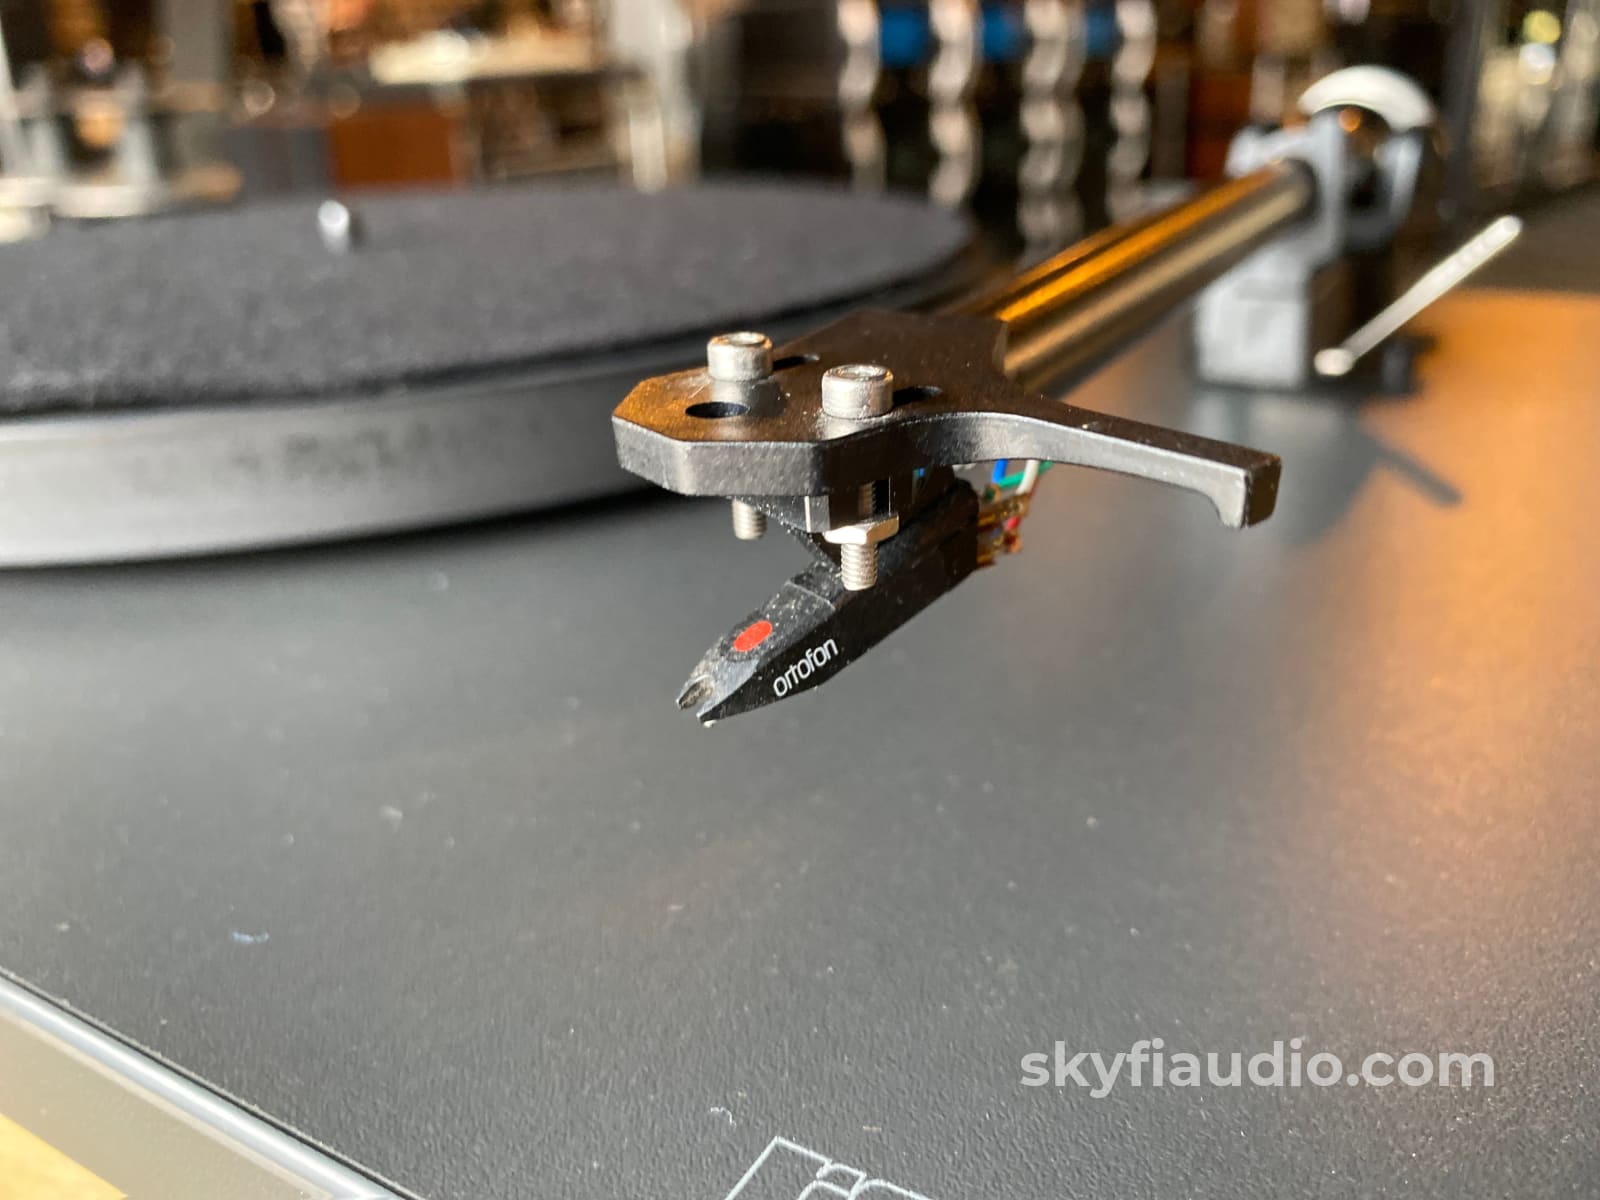 Rega Planar 1 (P1) Turntable Fitted With Ortofon Cartridge